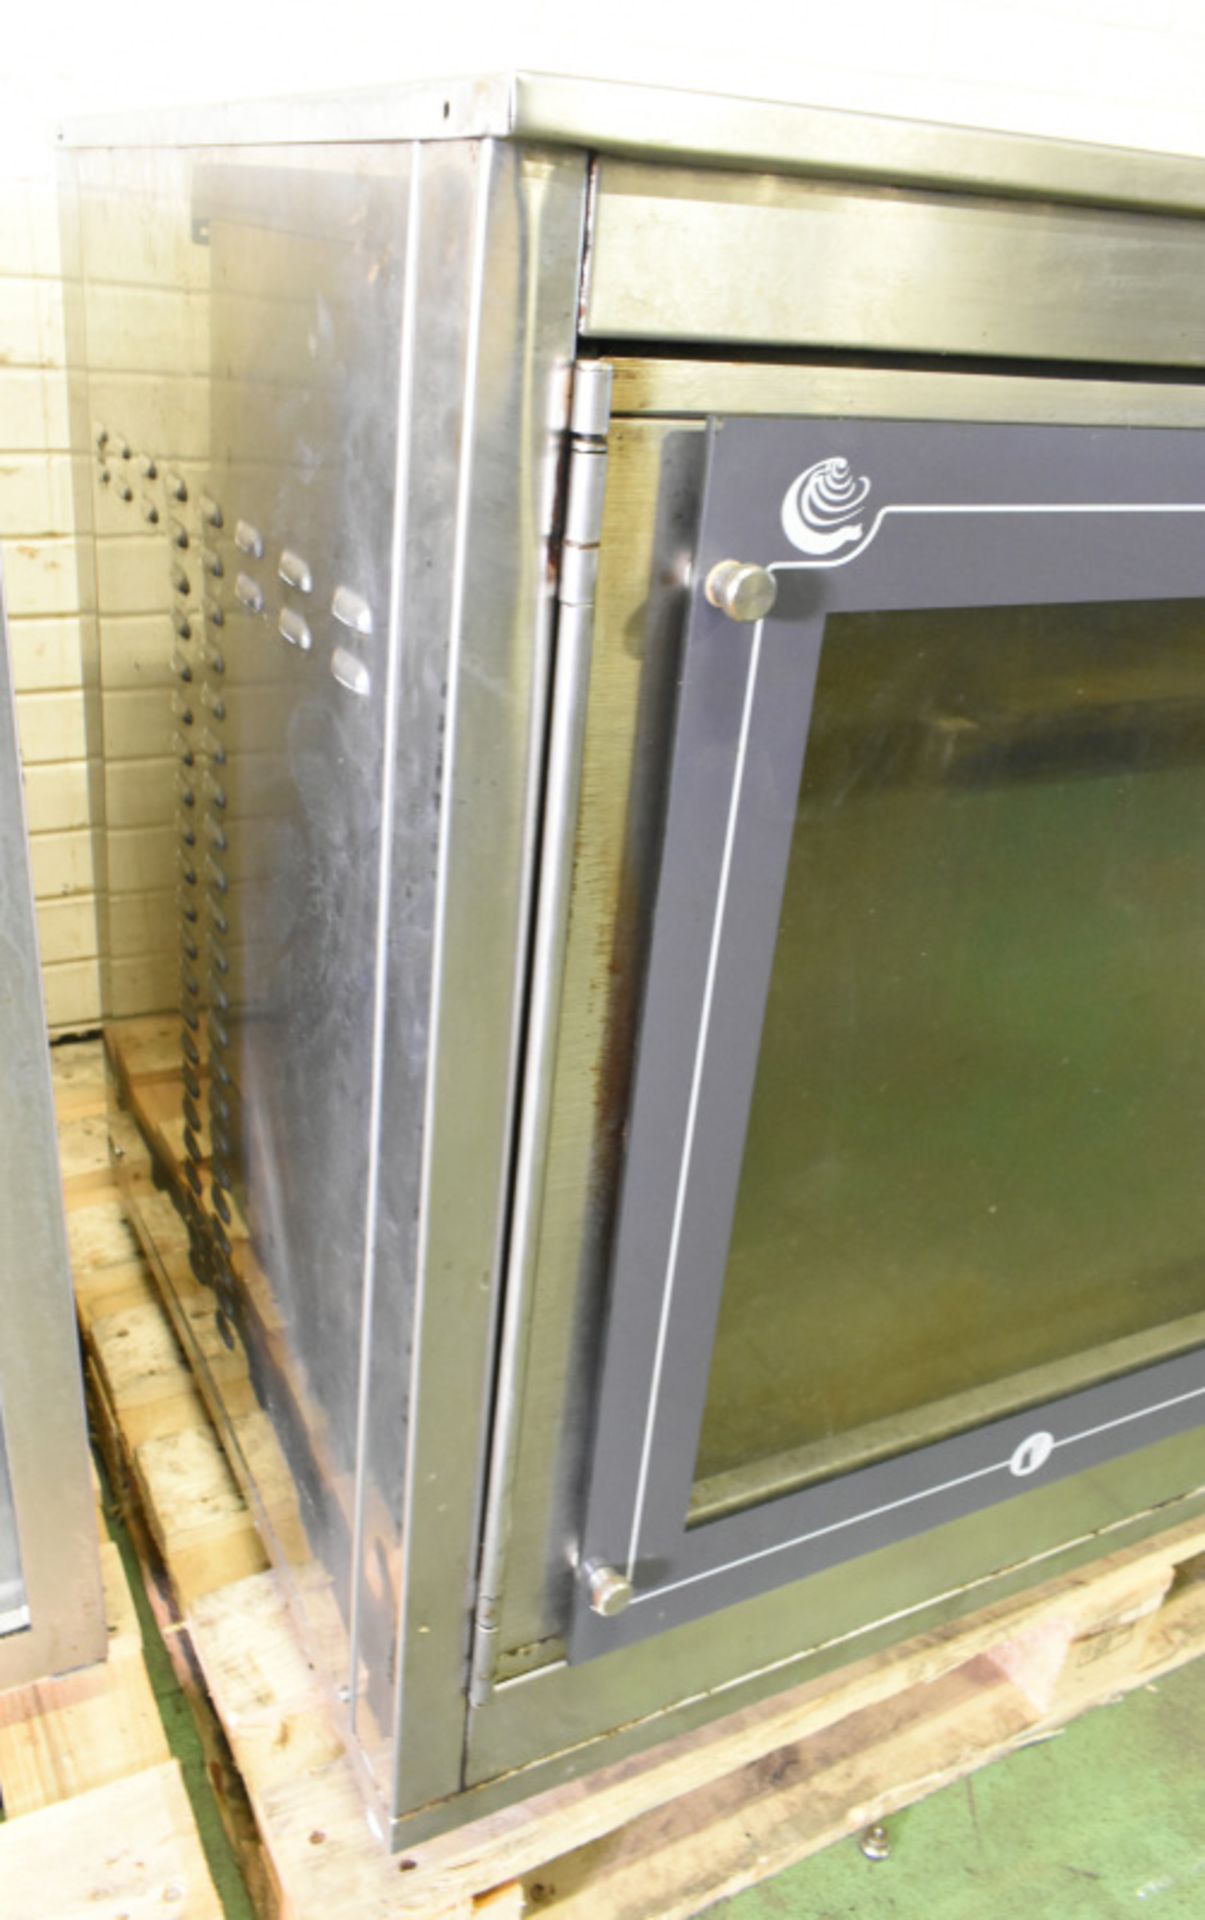 Euro bakery oven L 91 x W 73 x H 87cm - Image 6 of 6